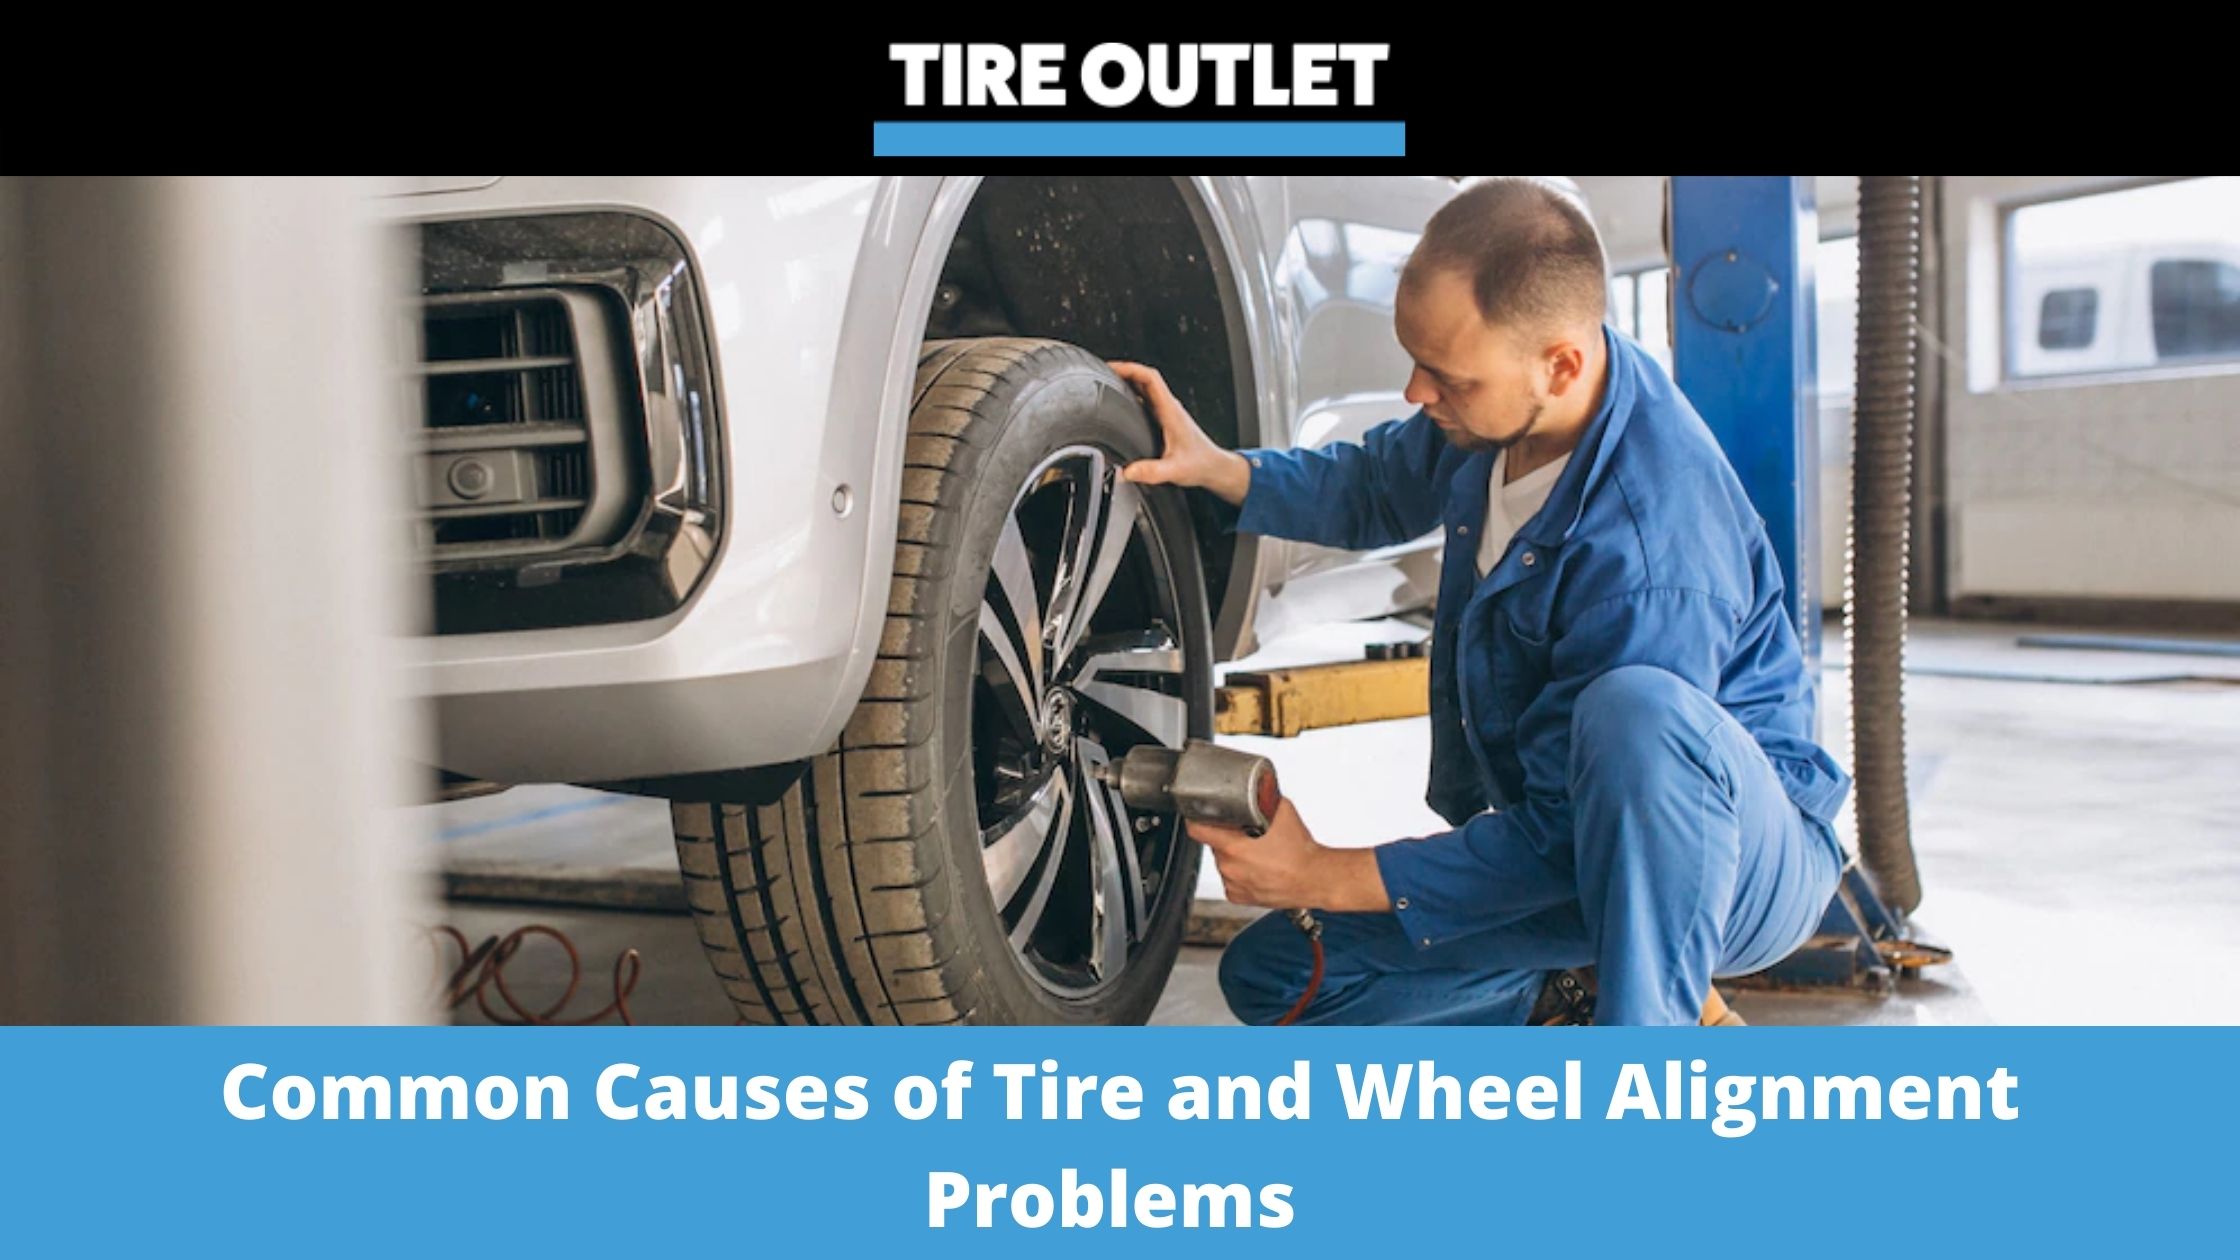 Common Causes of Tire and Wheel Alignment Problems